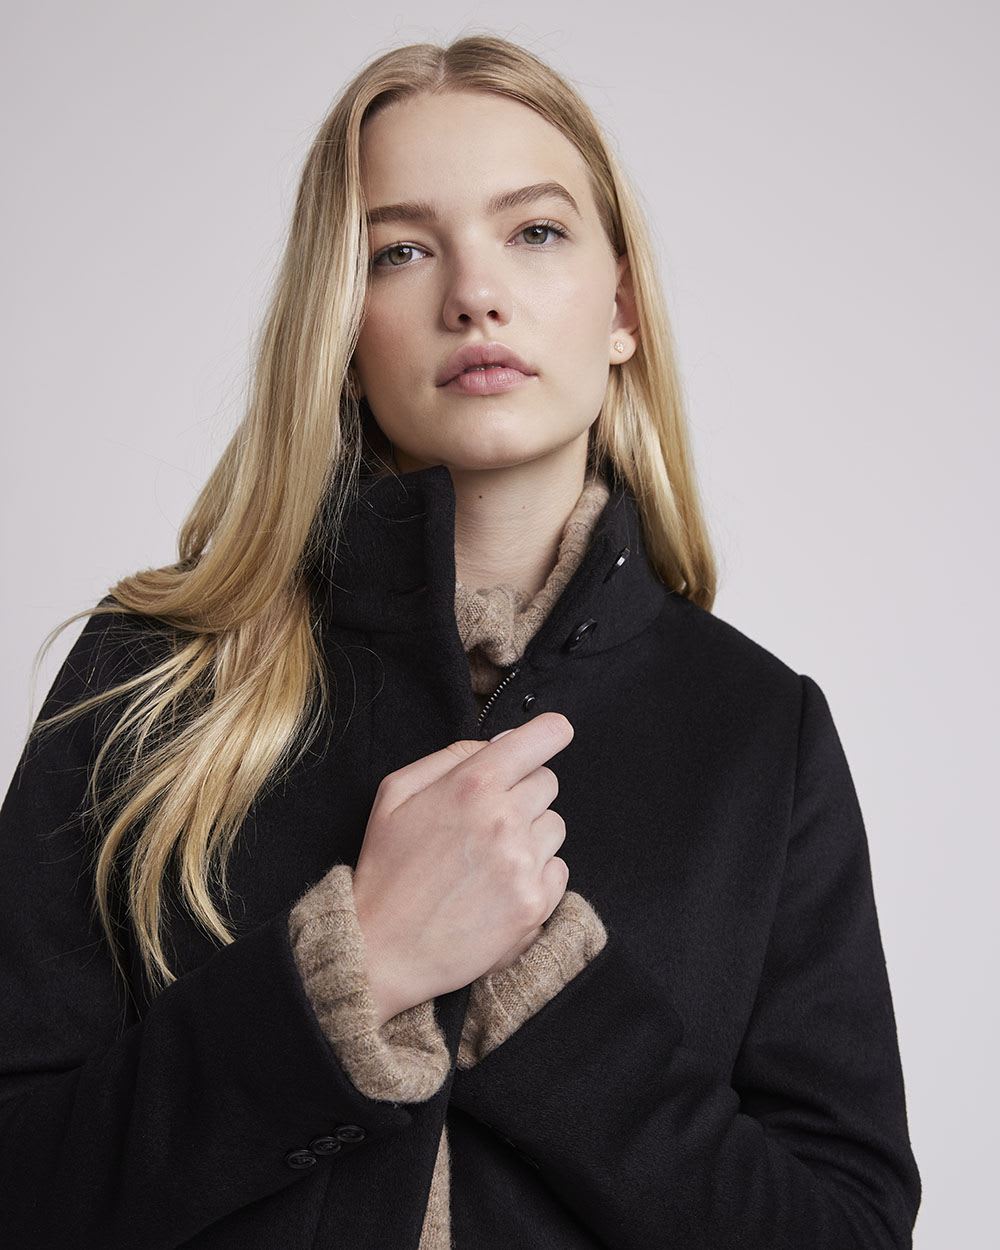 Classic Wool Coat with High Neckline | RW&CO.